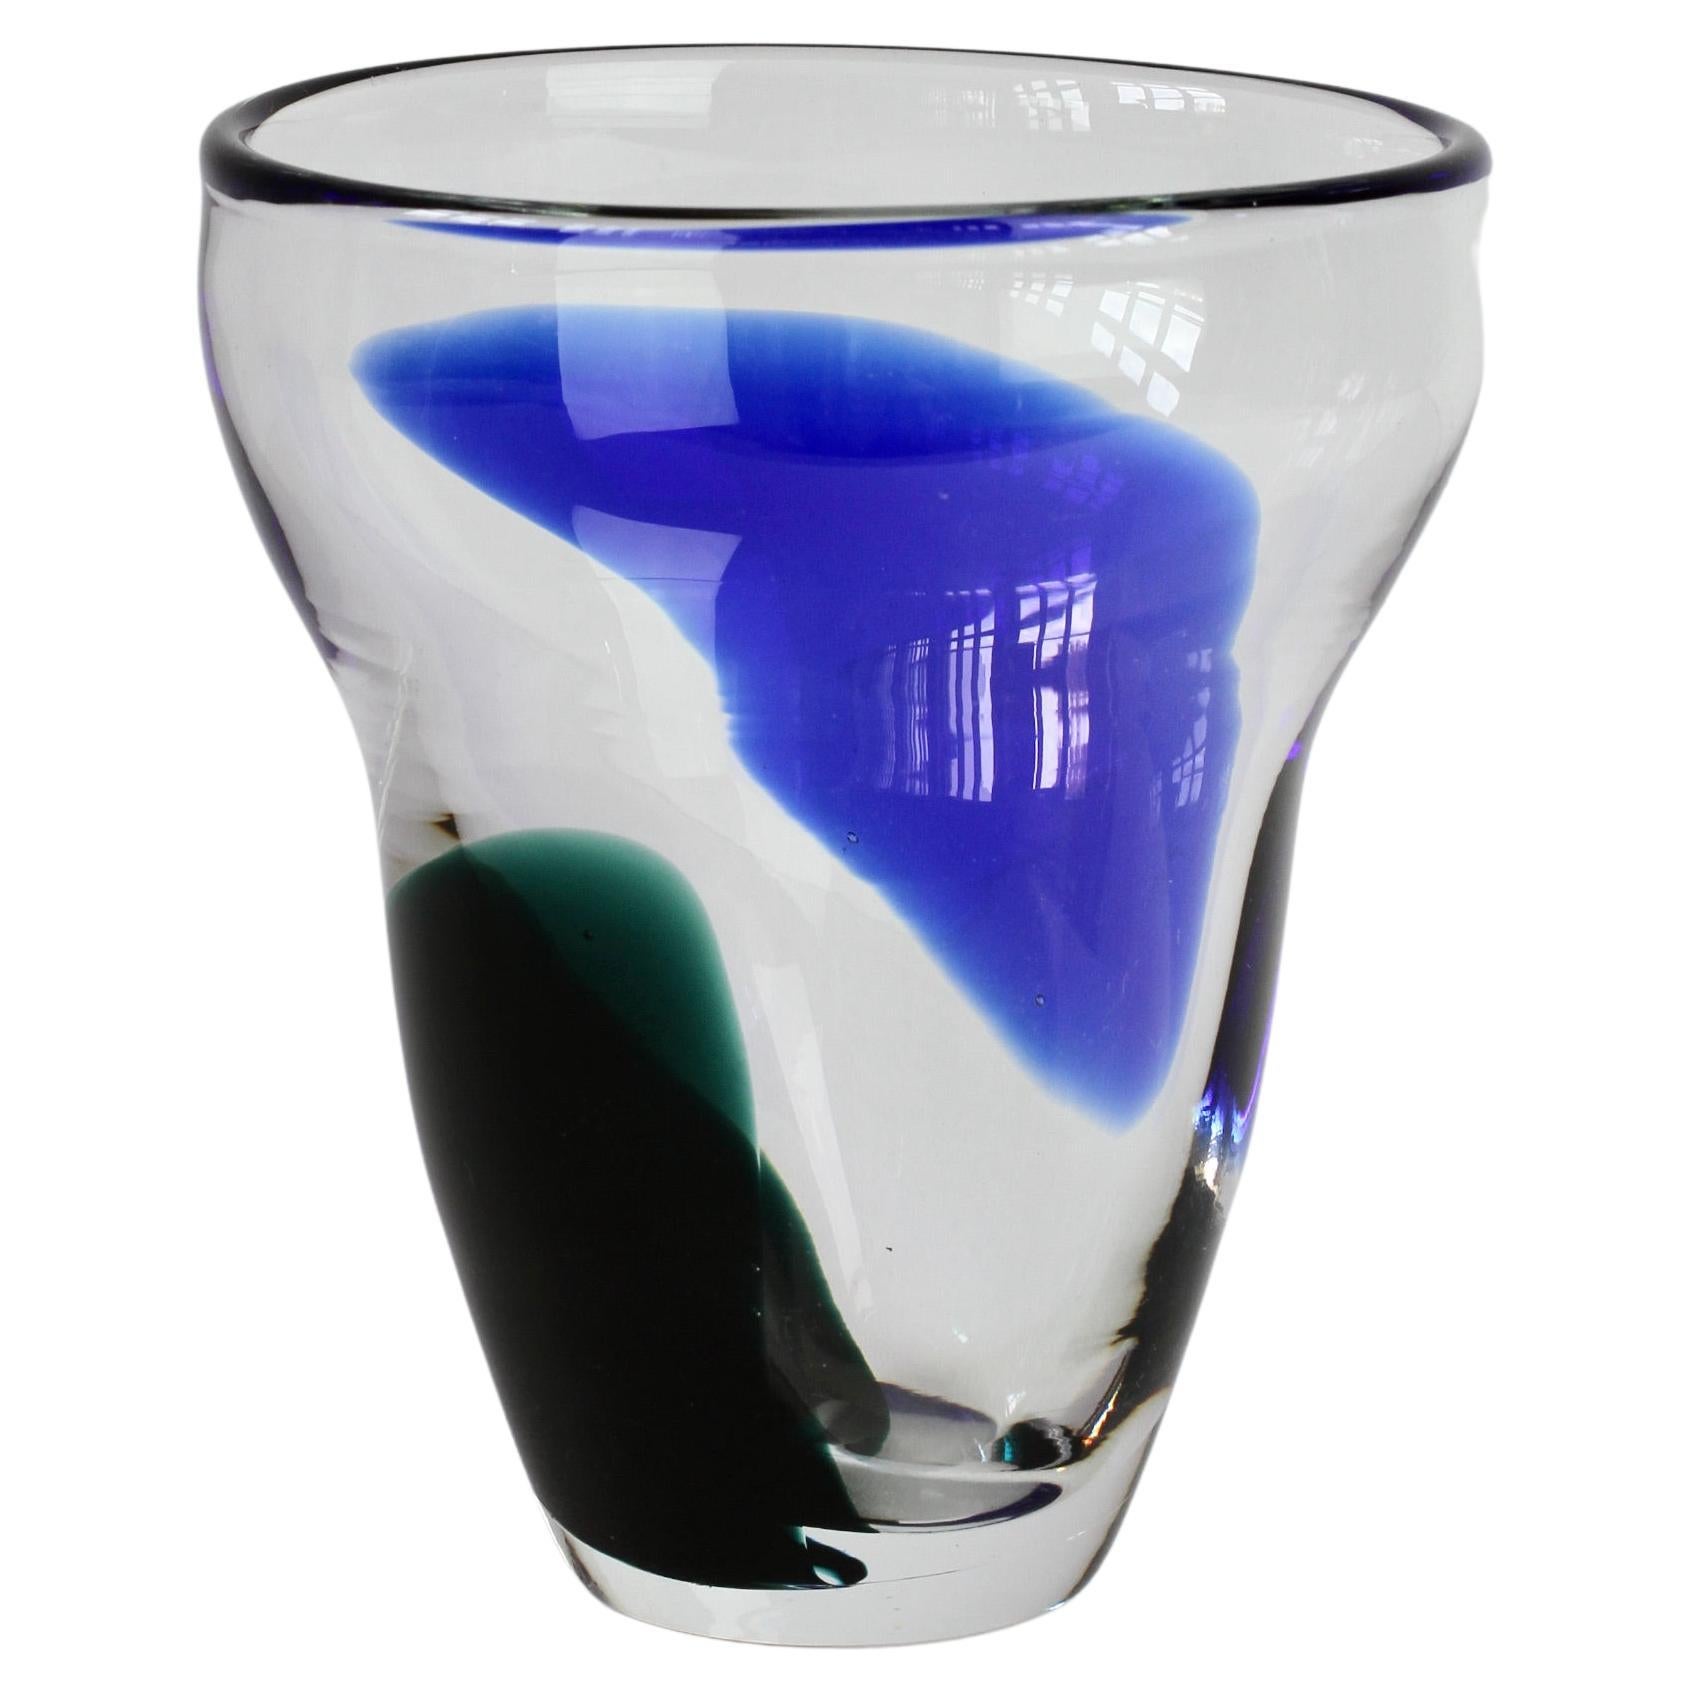 Stunning vintage Scandinavian mid-century clear glass vase with cobalt blue and emerald green 'patches' or inclusions made by Wiktor Berndt for Flygsfors Glass, Sweden, in 1958. A really stunning piece, reminiscent of the 'A Macchie' series of works